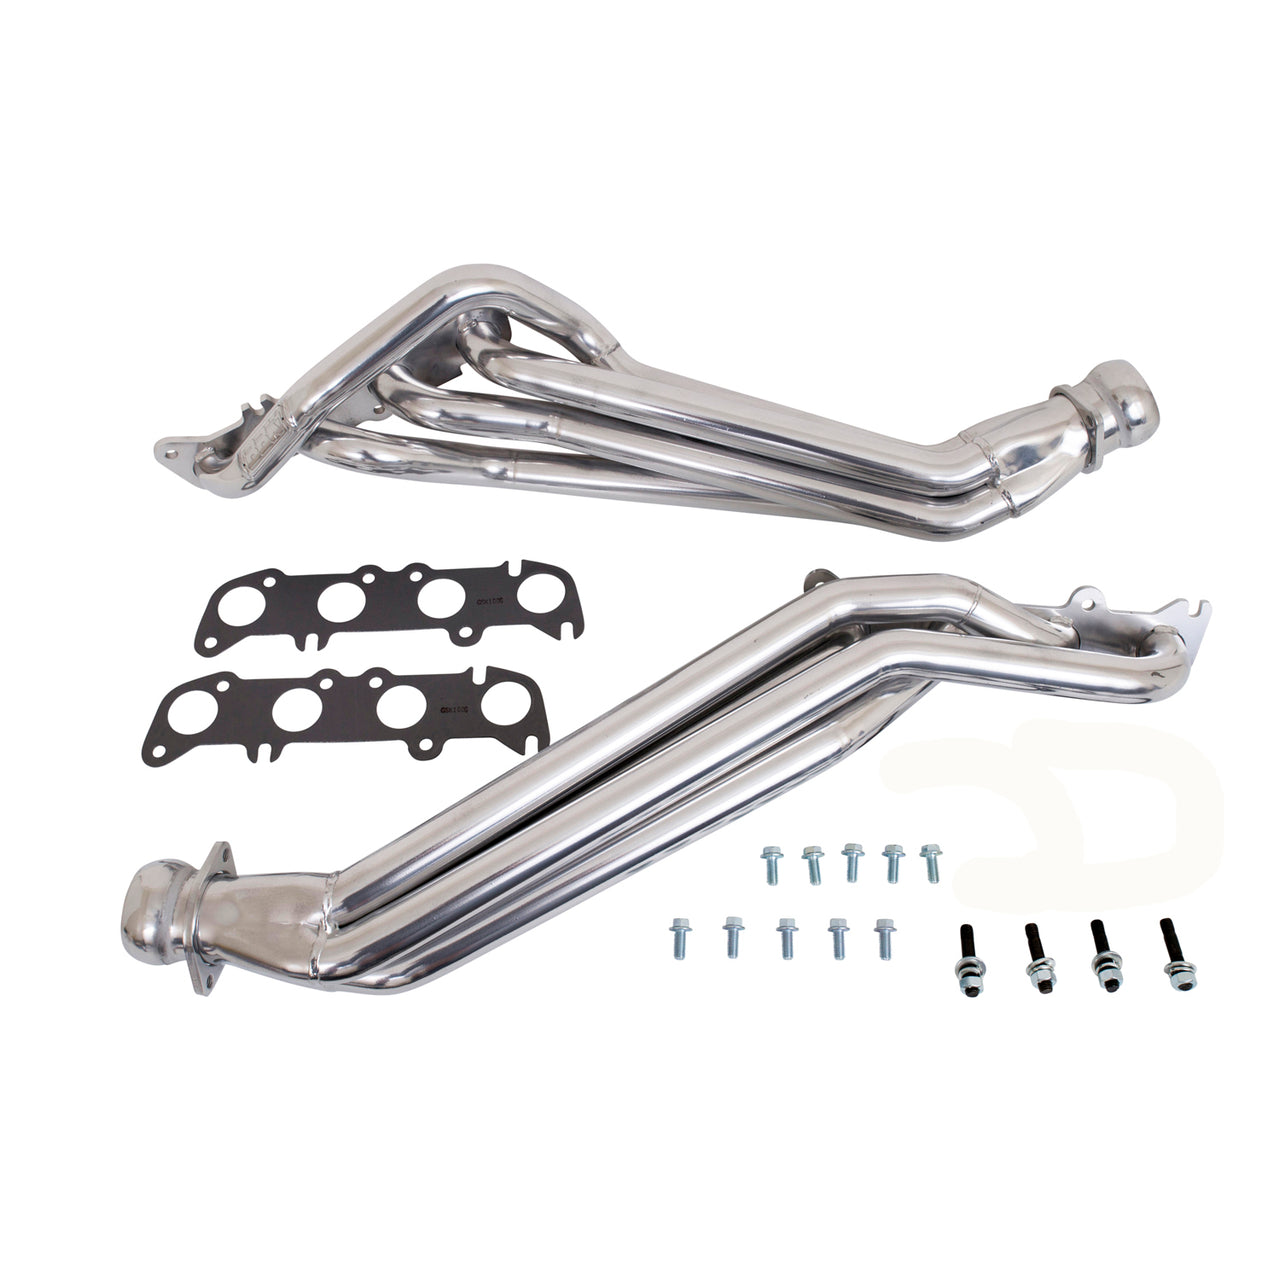 2011-2021 MUSTANG GT 1-3/4 LONG TUBE HEADERS (POLISHED SILVER CERAMIC)